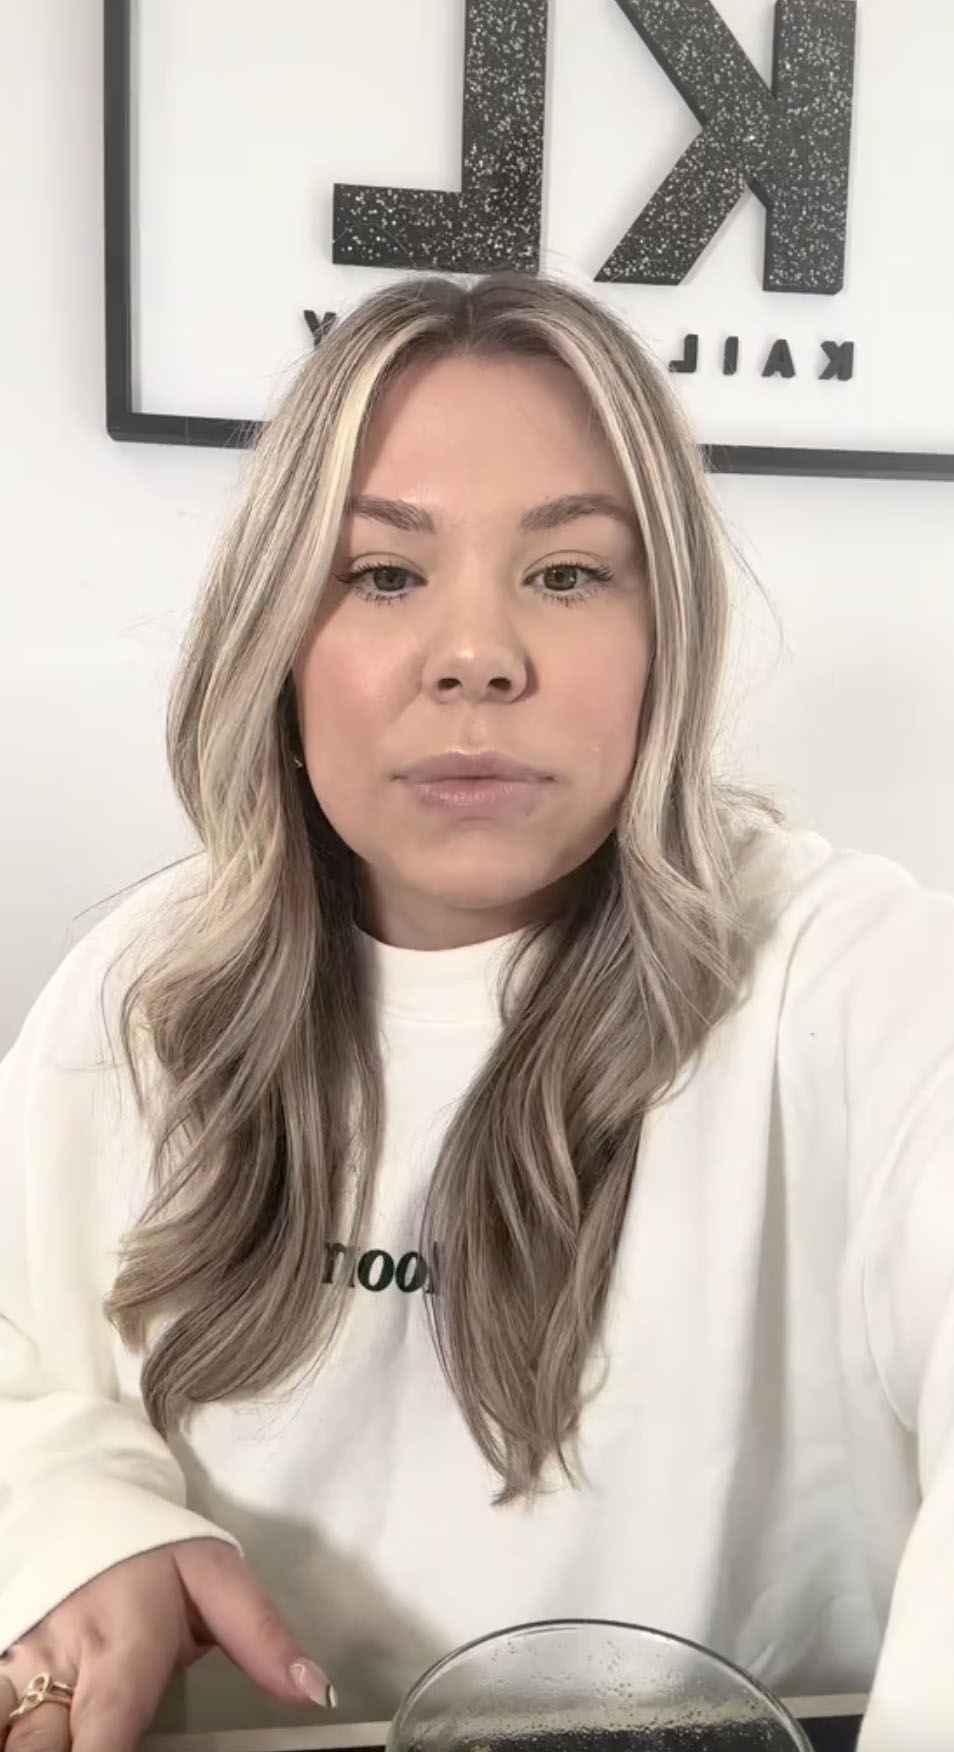 Kailyn Lowry revealed she is working on an architect for her new home